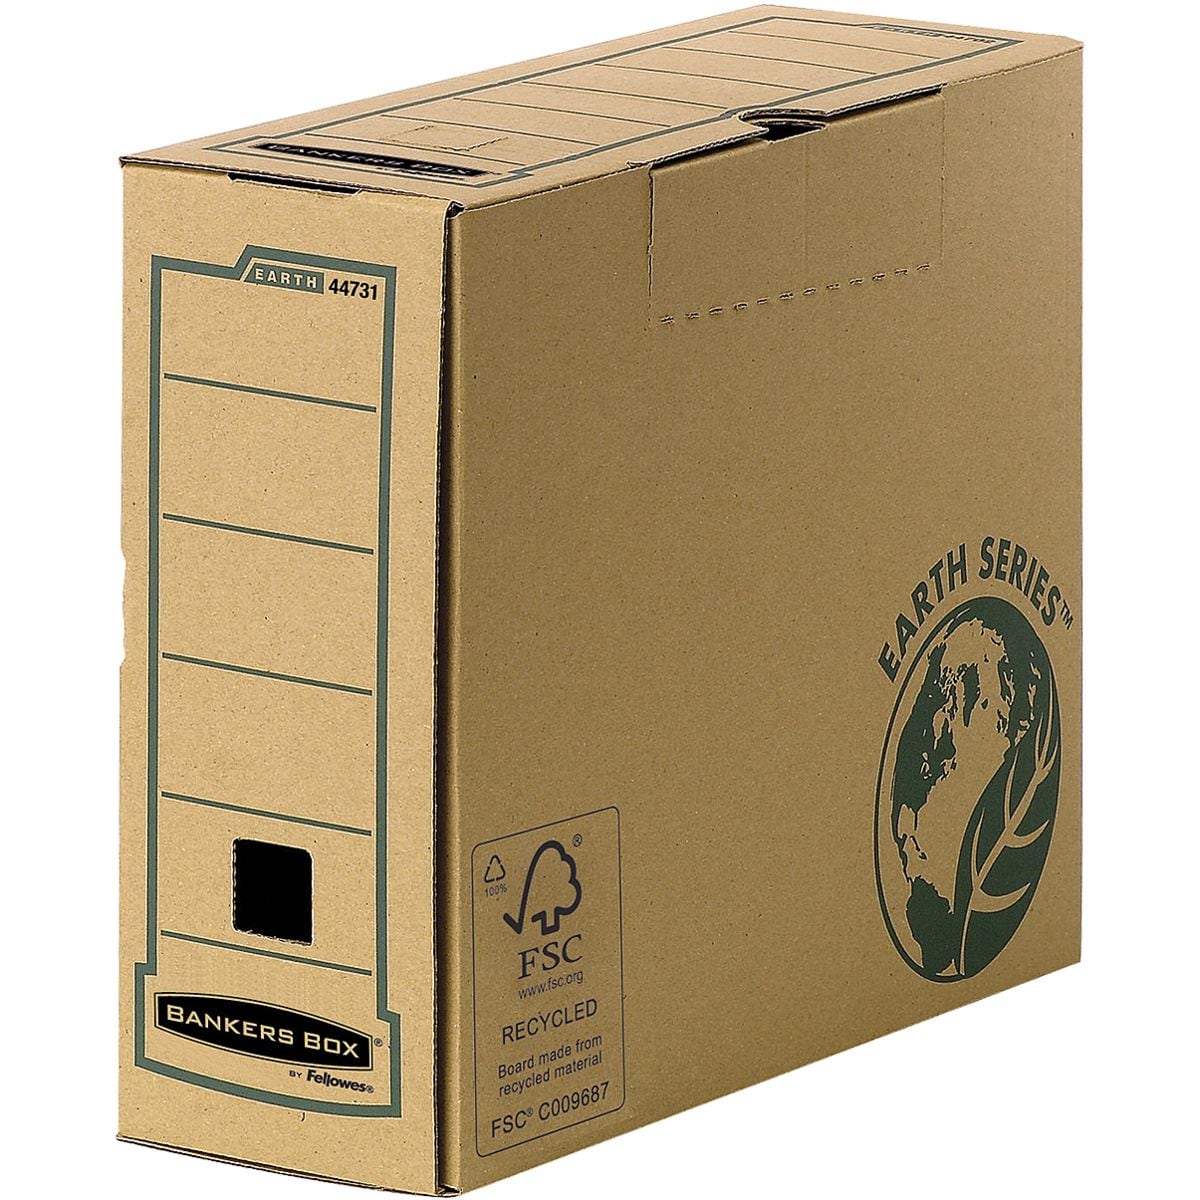 Bankers Box Earth Series 20er-Pack Archivboxen Earth Series 10,0 x 35,0 x 26,0 cm